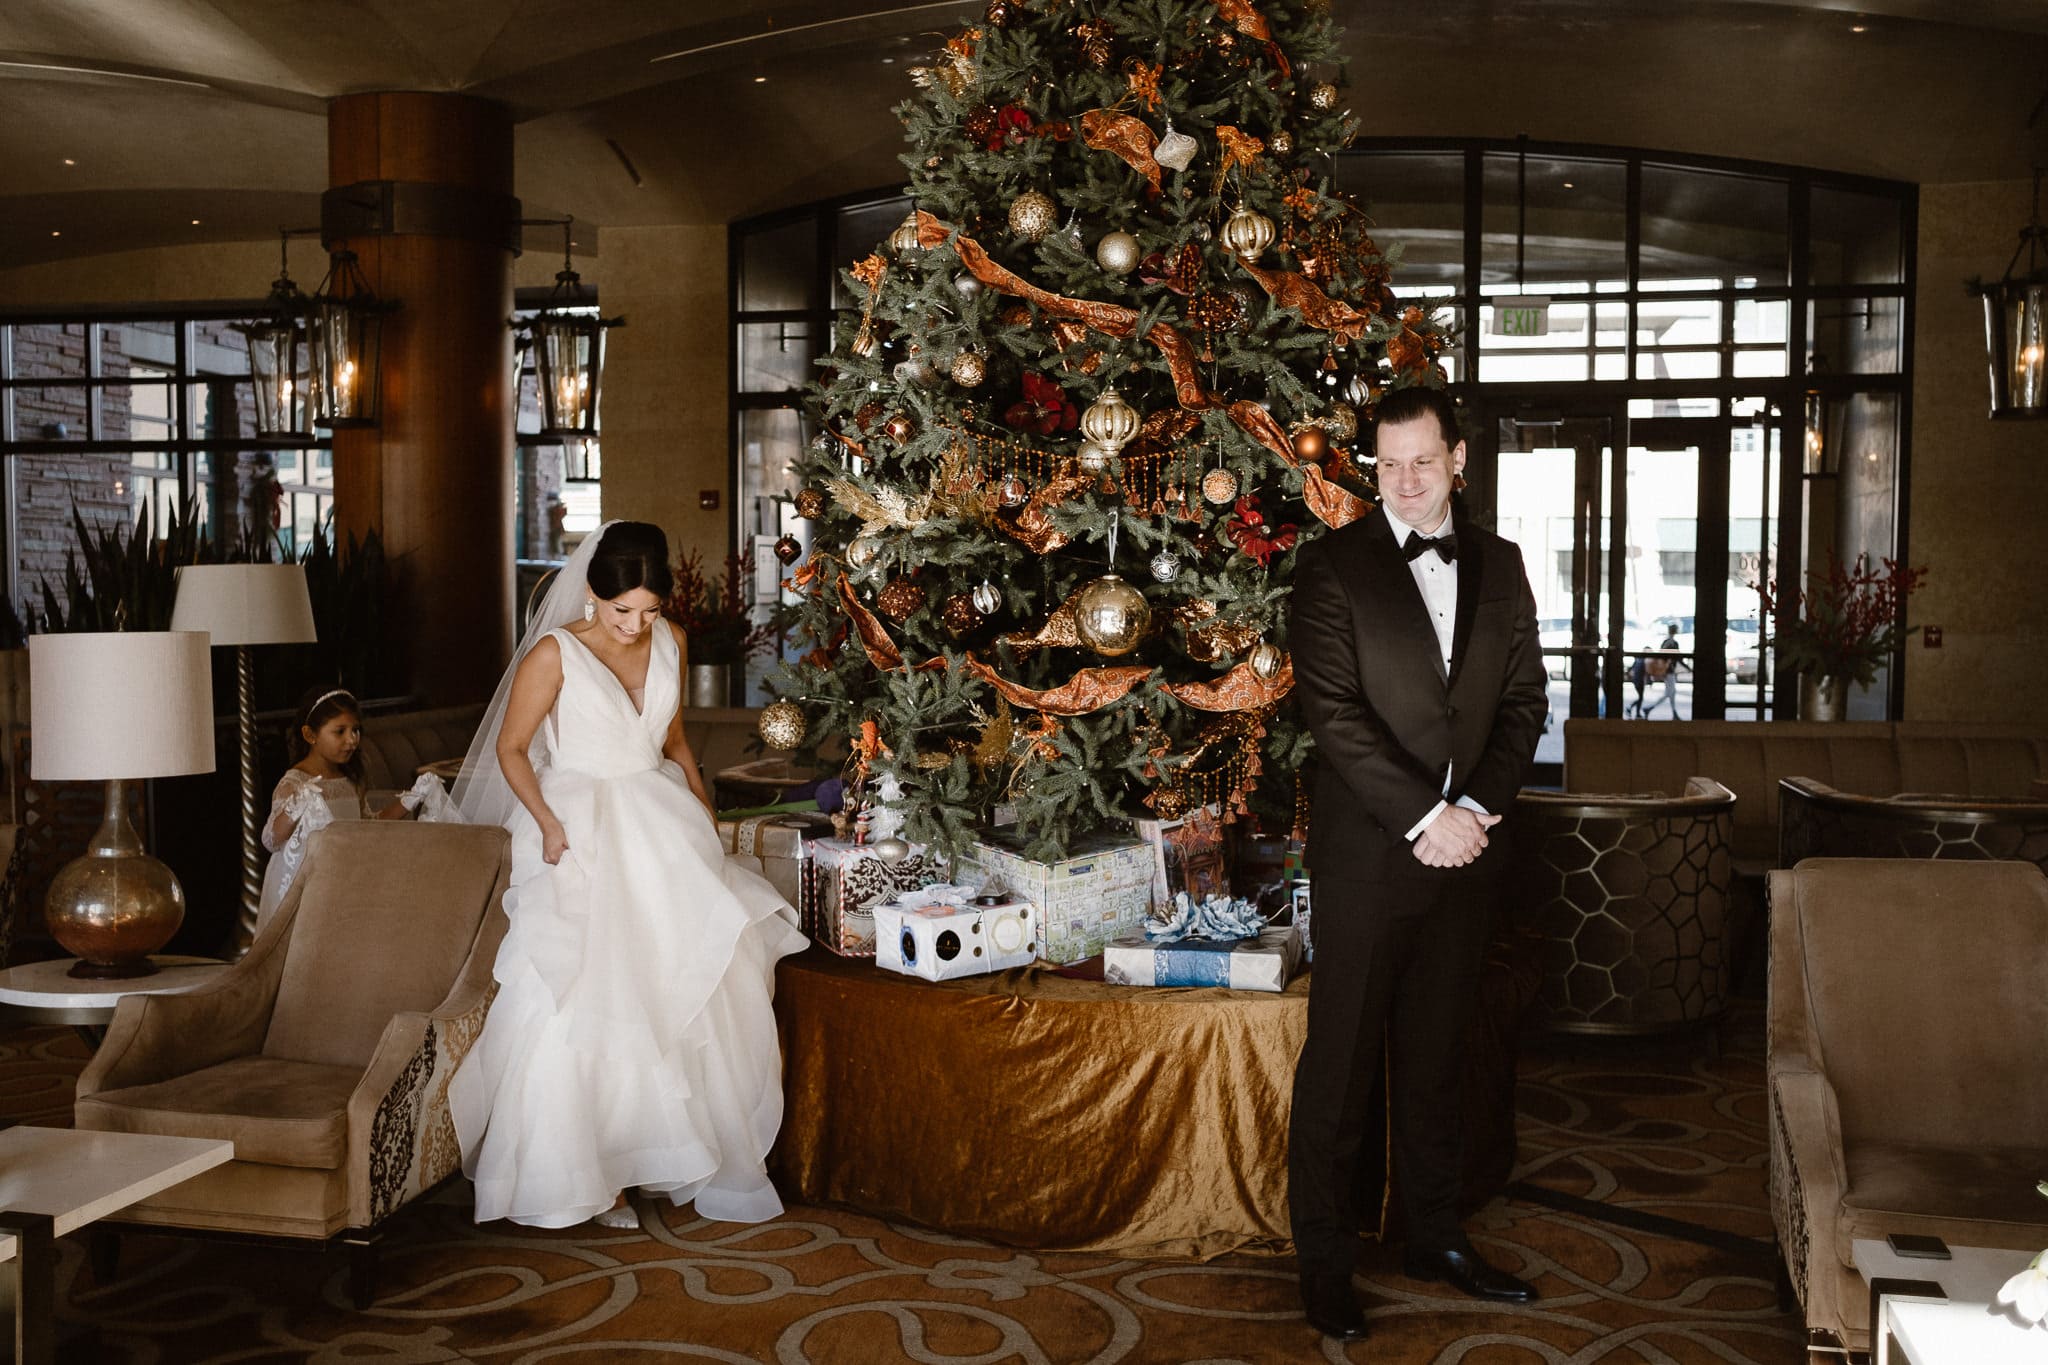 Bride and groom first look in front of giant Christmas tree at The St Julien Hotel & Spa in Boulder, St Julien wedding photographer